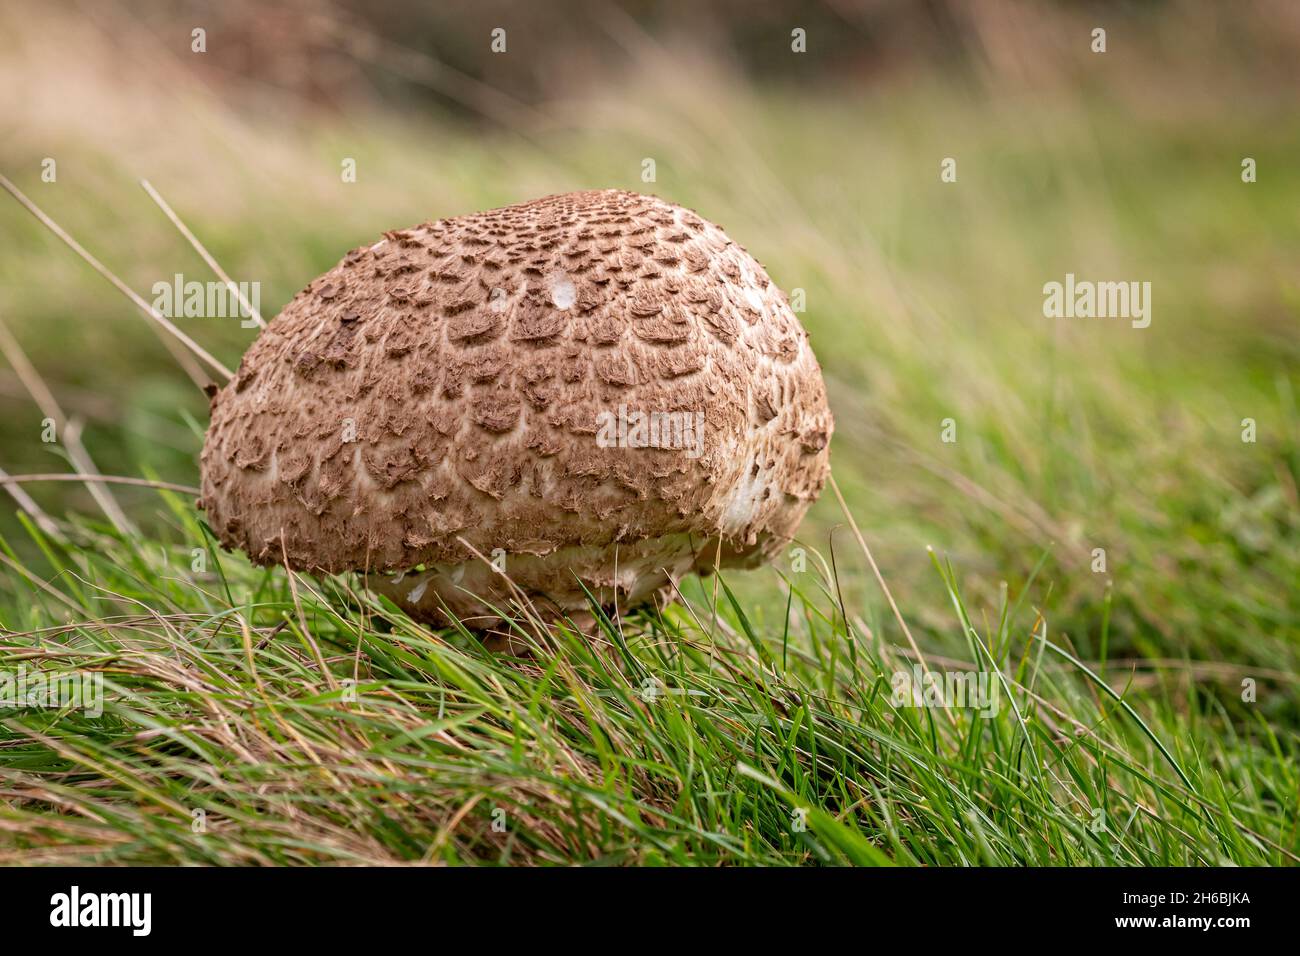 Close up of a shaggy parasol mushroom with brown scales Stock Photo